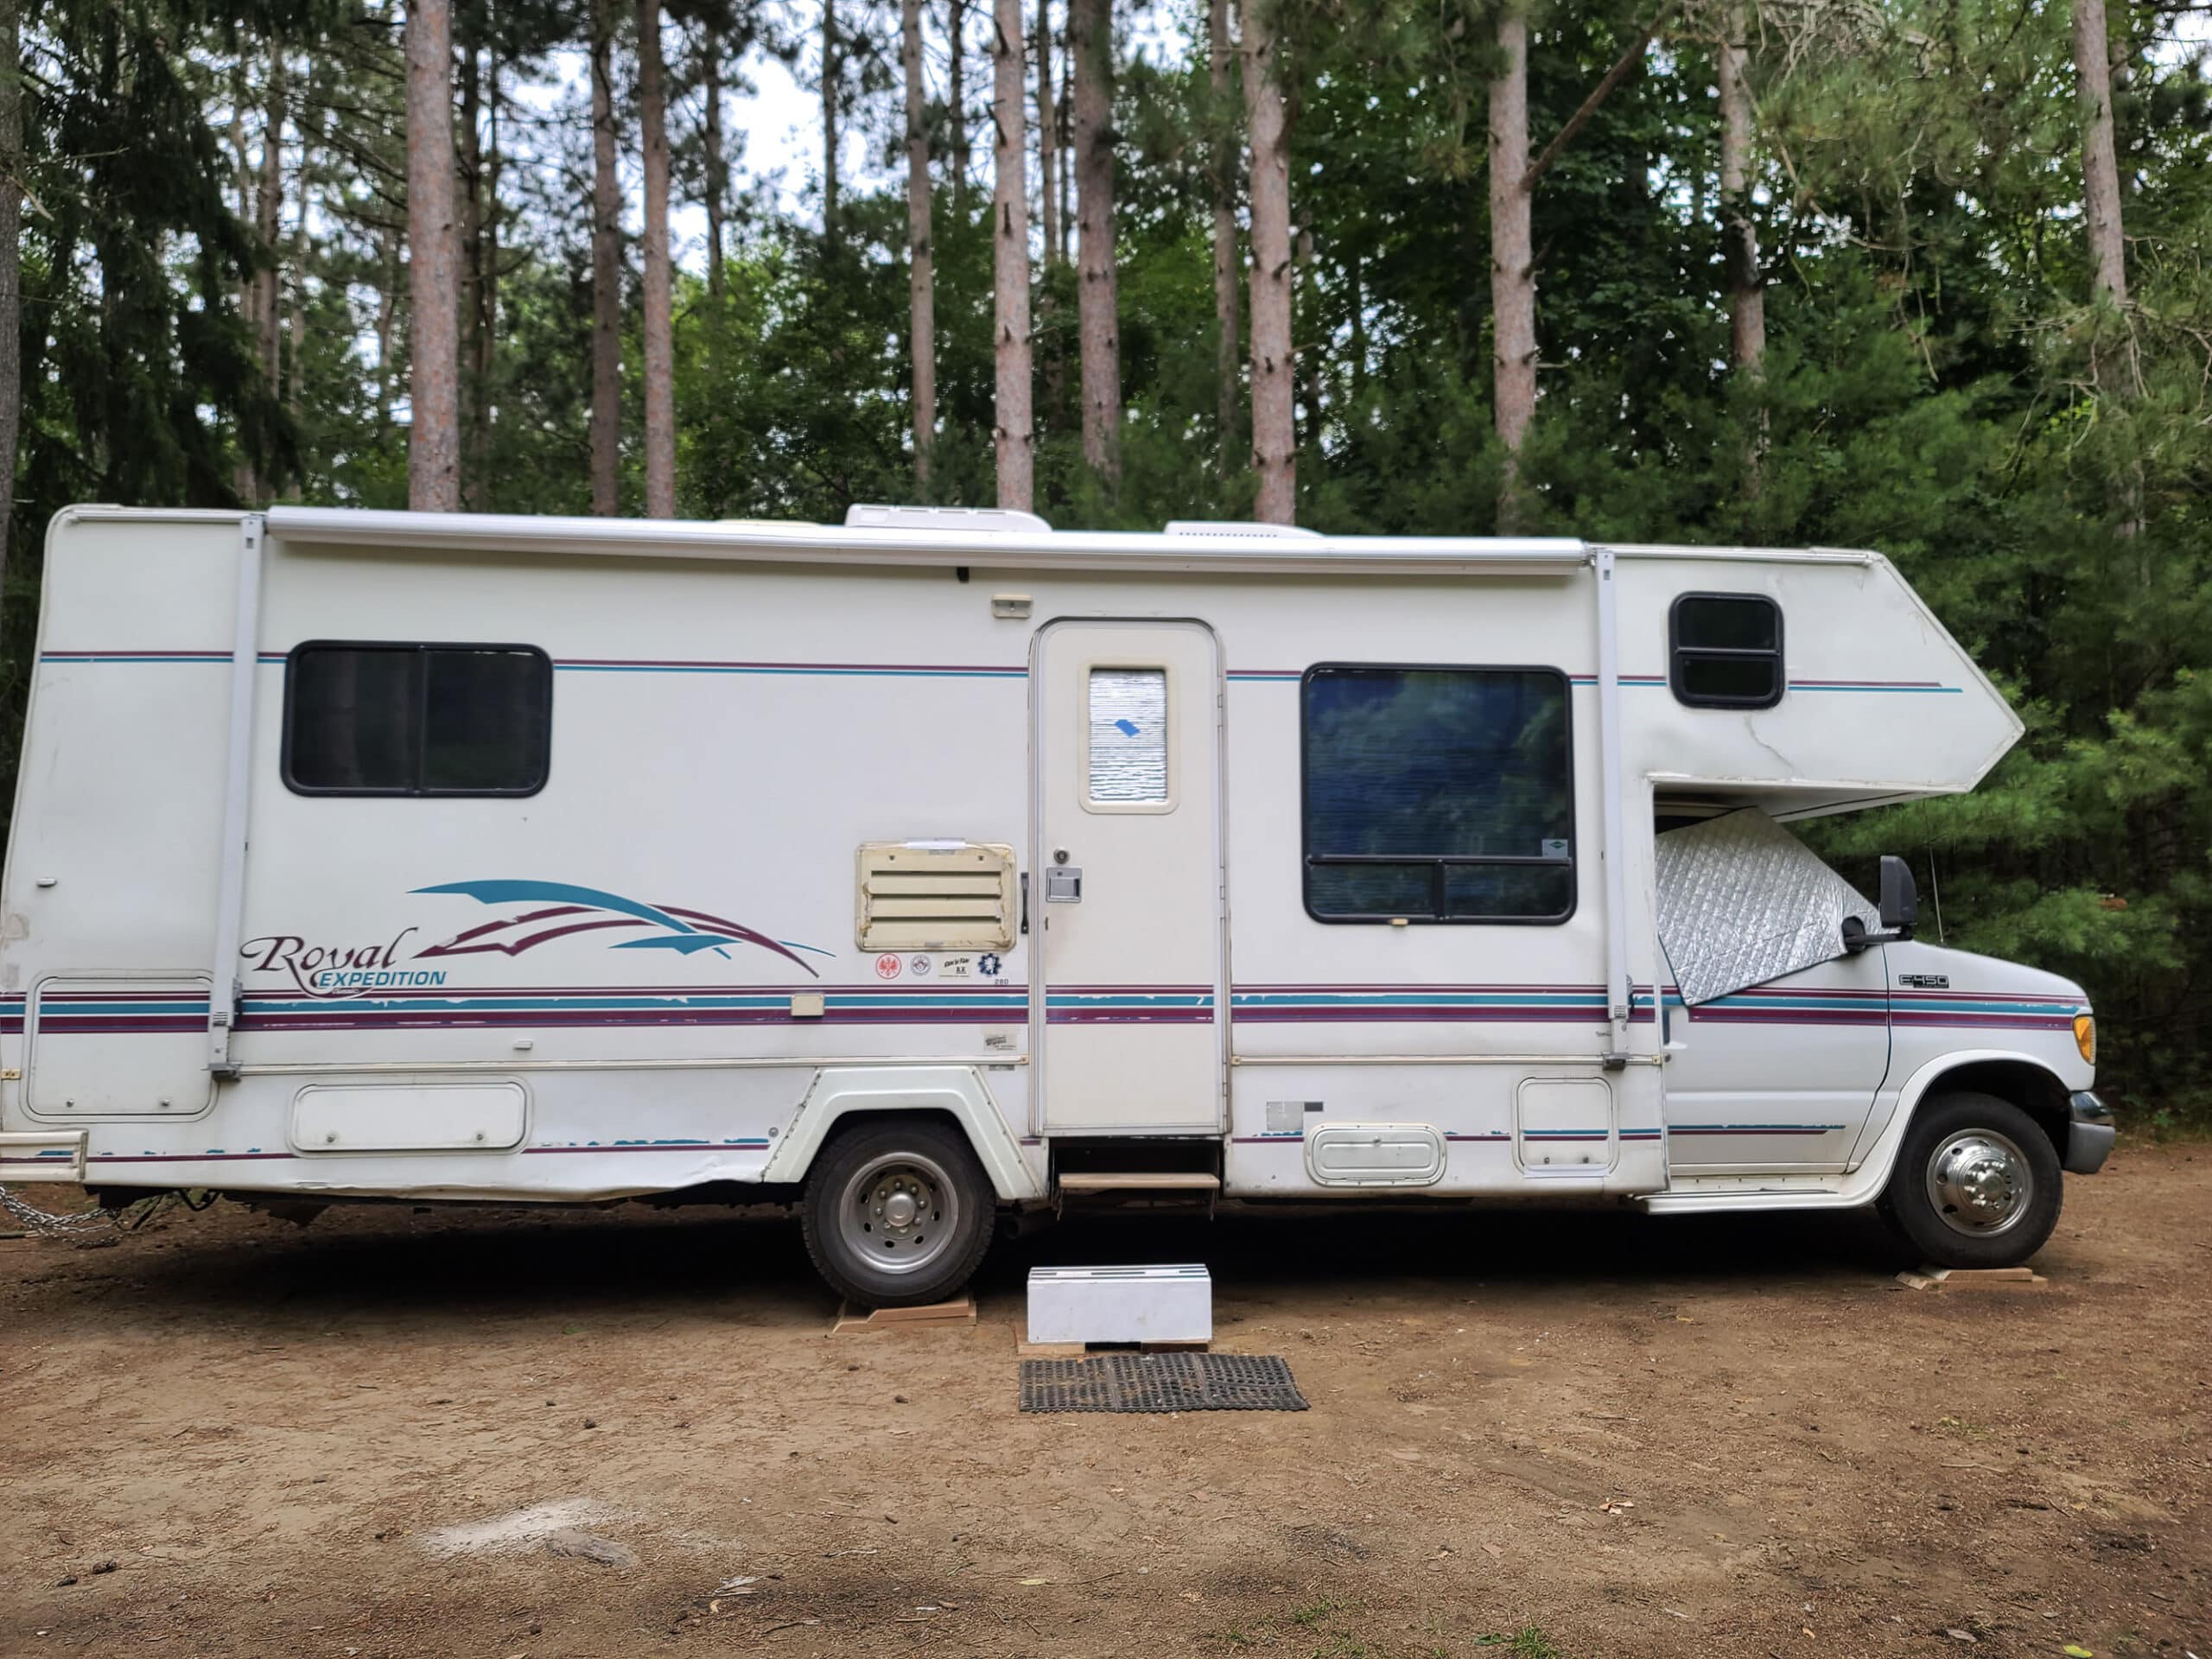 A side view of a motorhome at a campsite.  There are boards seen under the tires.  The side steps are out, but the awning is retracted.